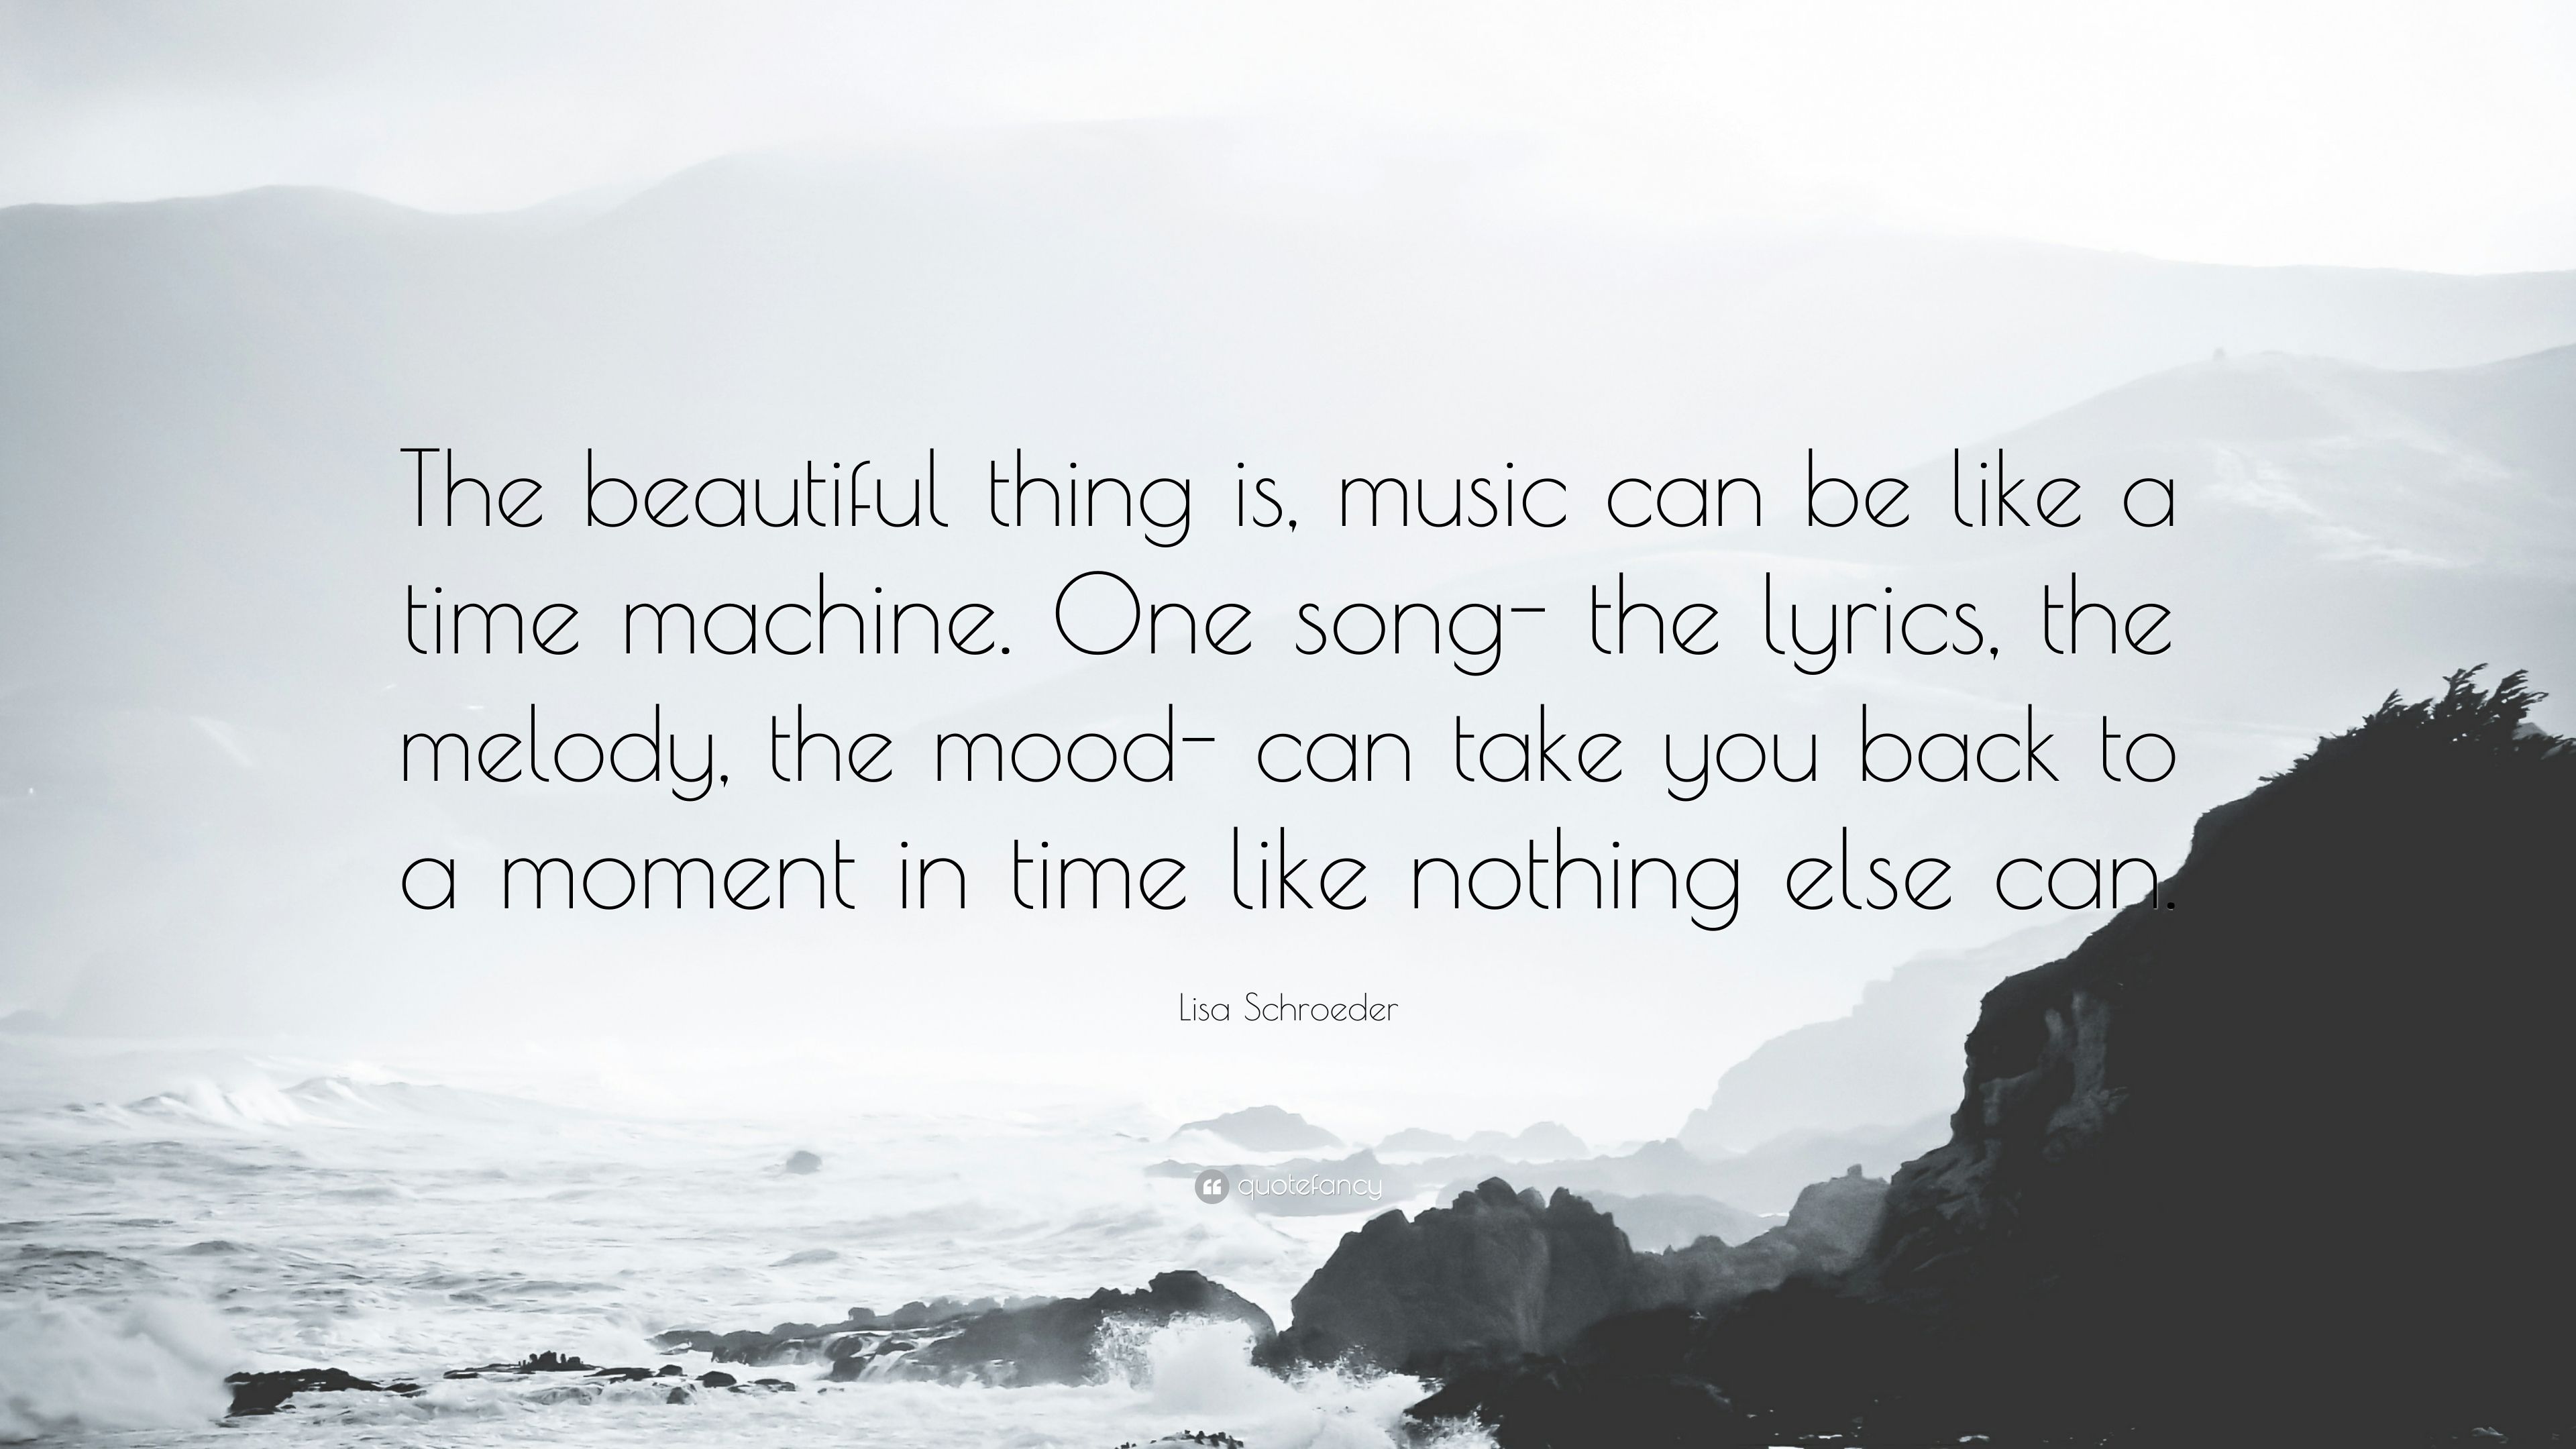 Lisa Schroeder Quote: “The beautiful thing is, music can be like a time machine. One song- the lyrics, the melody, the mood- can take you back .” (12 wallpaper)